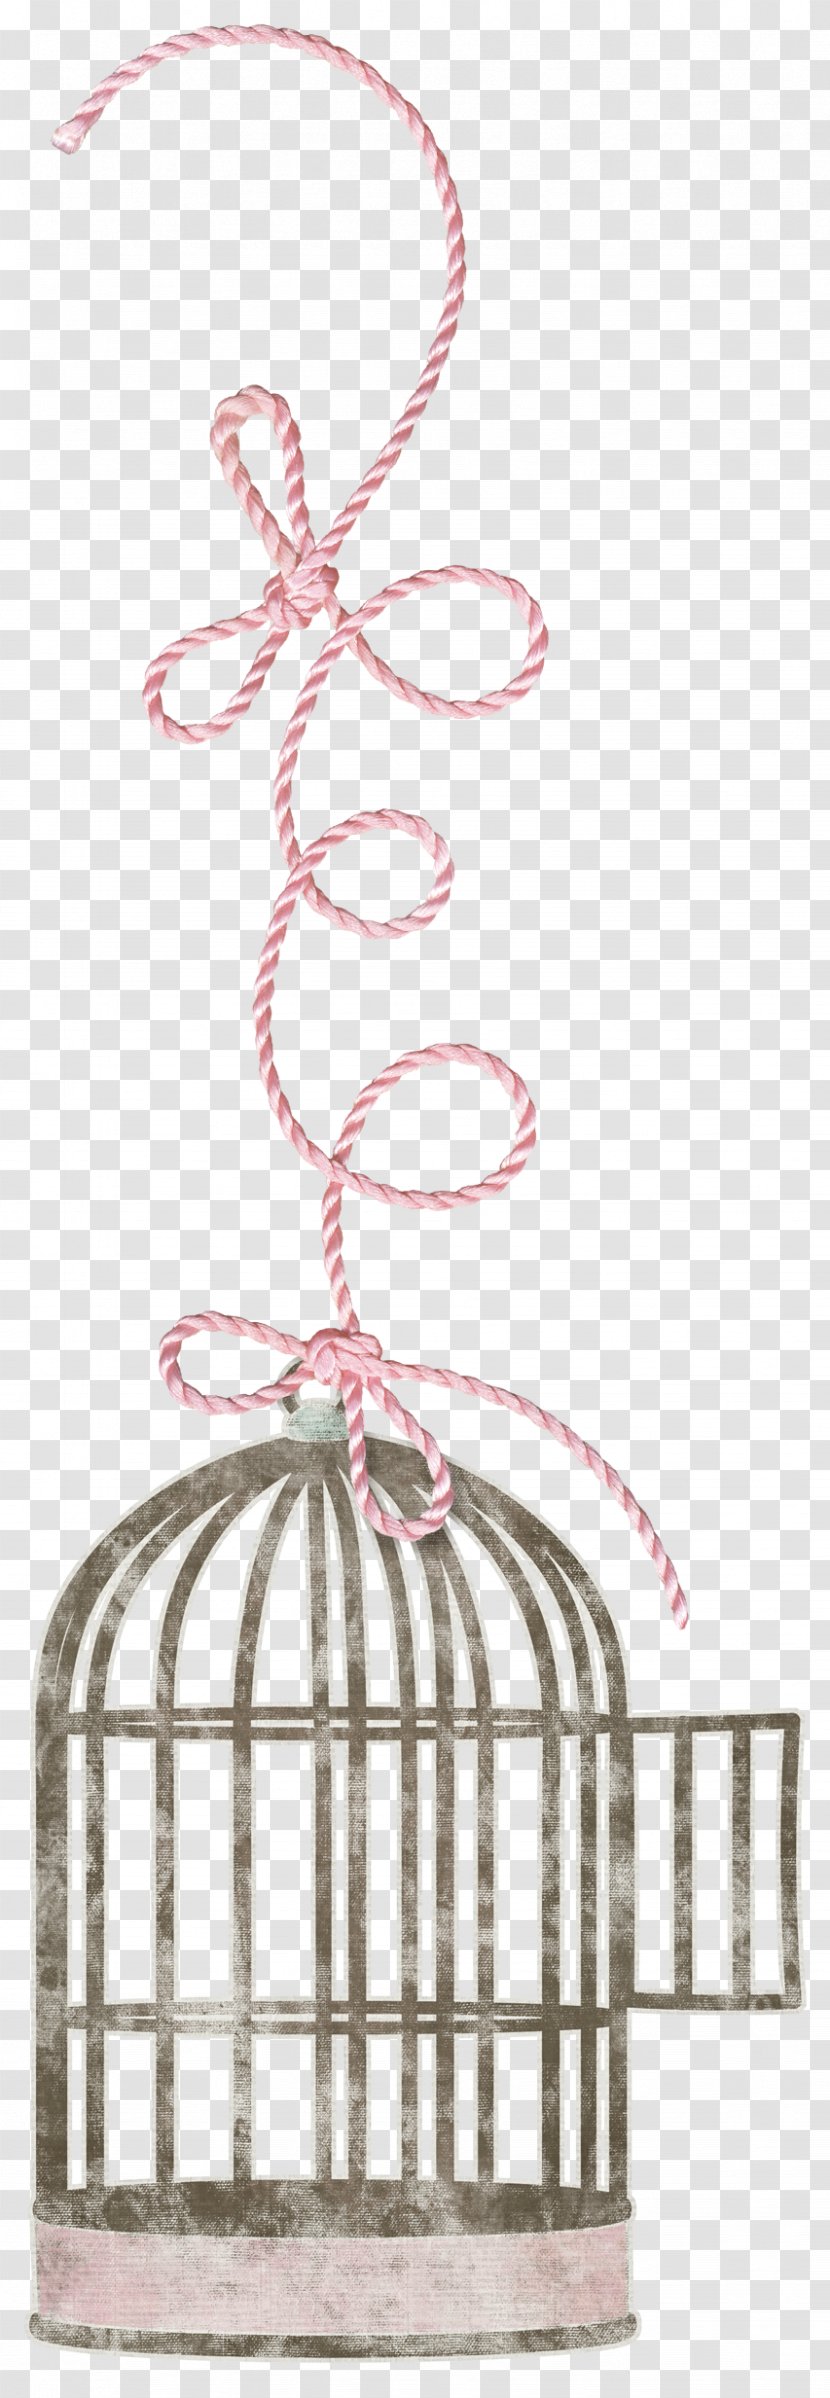 Rope Pink - Music Download - Rope,birdcage Transparent PNG